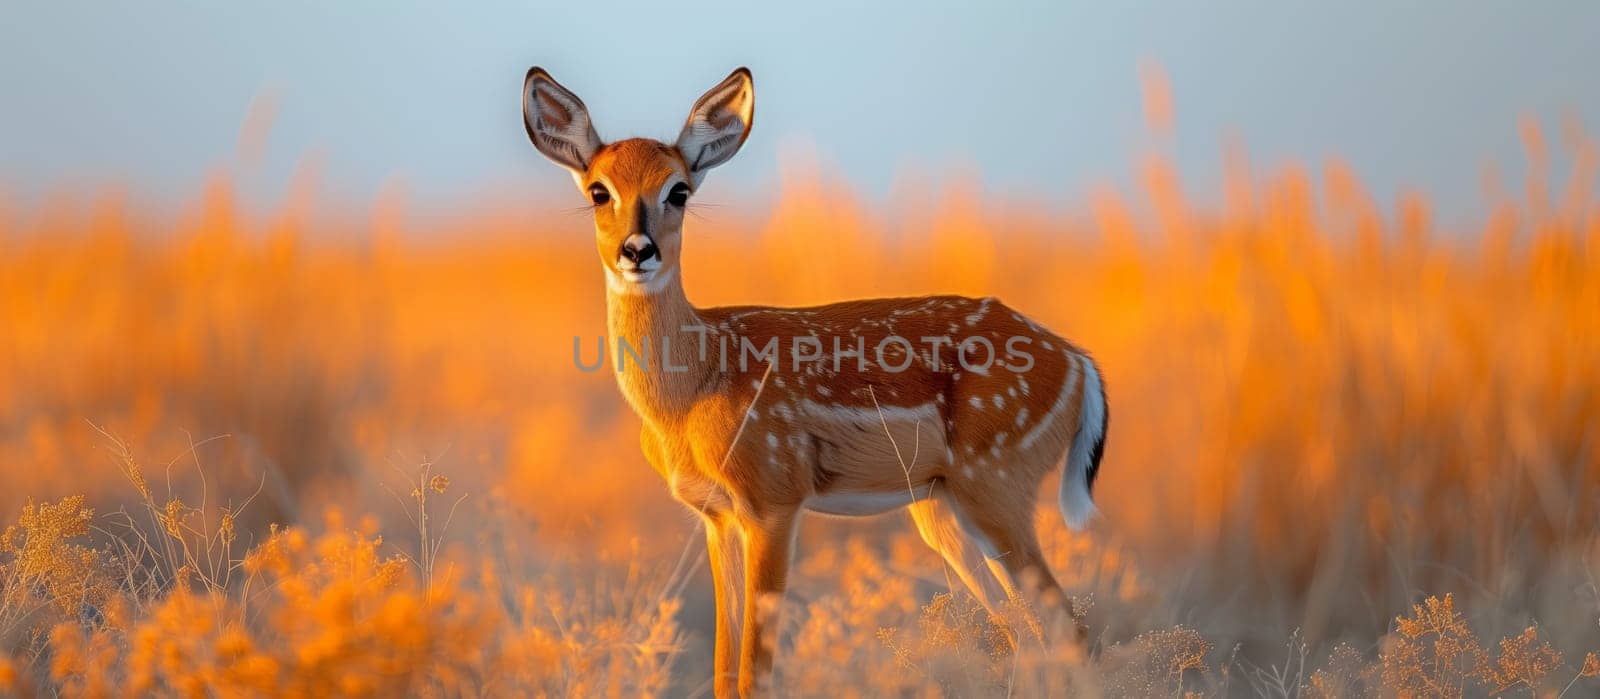 A deer, a terrestrial animal, stands in a natural landscape of tall grass. The grassland is the perfect environment for the deers adaptation, as it grazes peacefully with its tail swaying